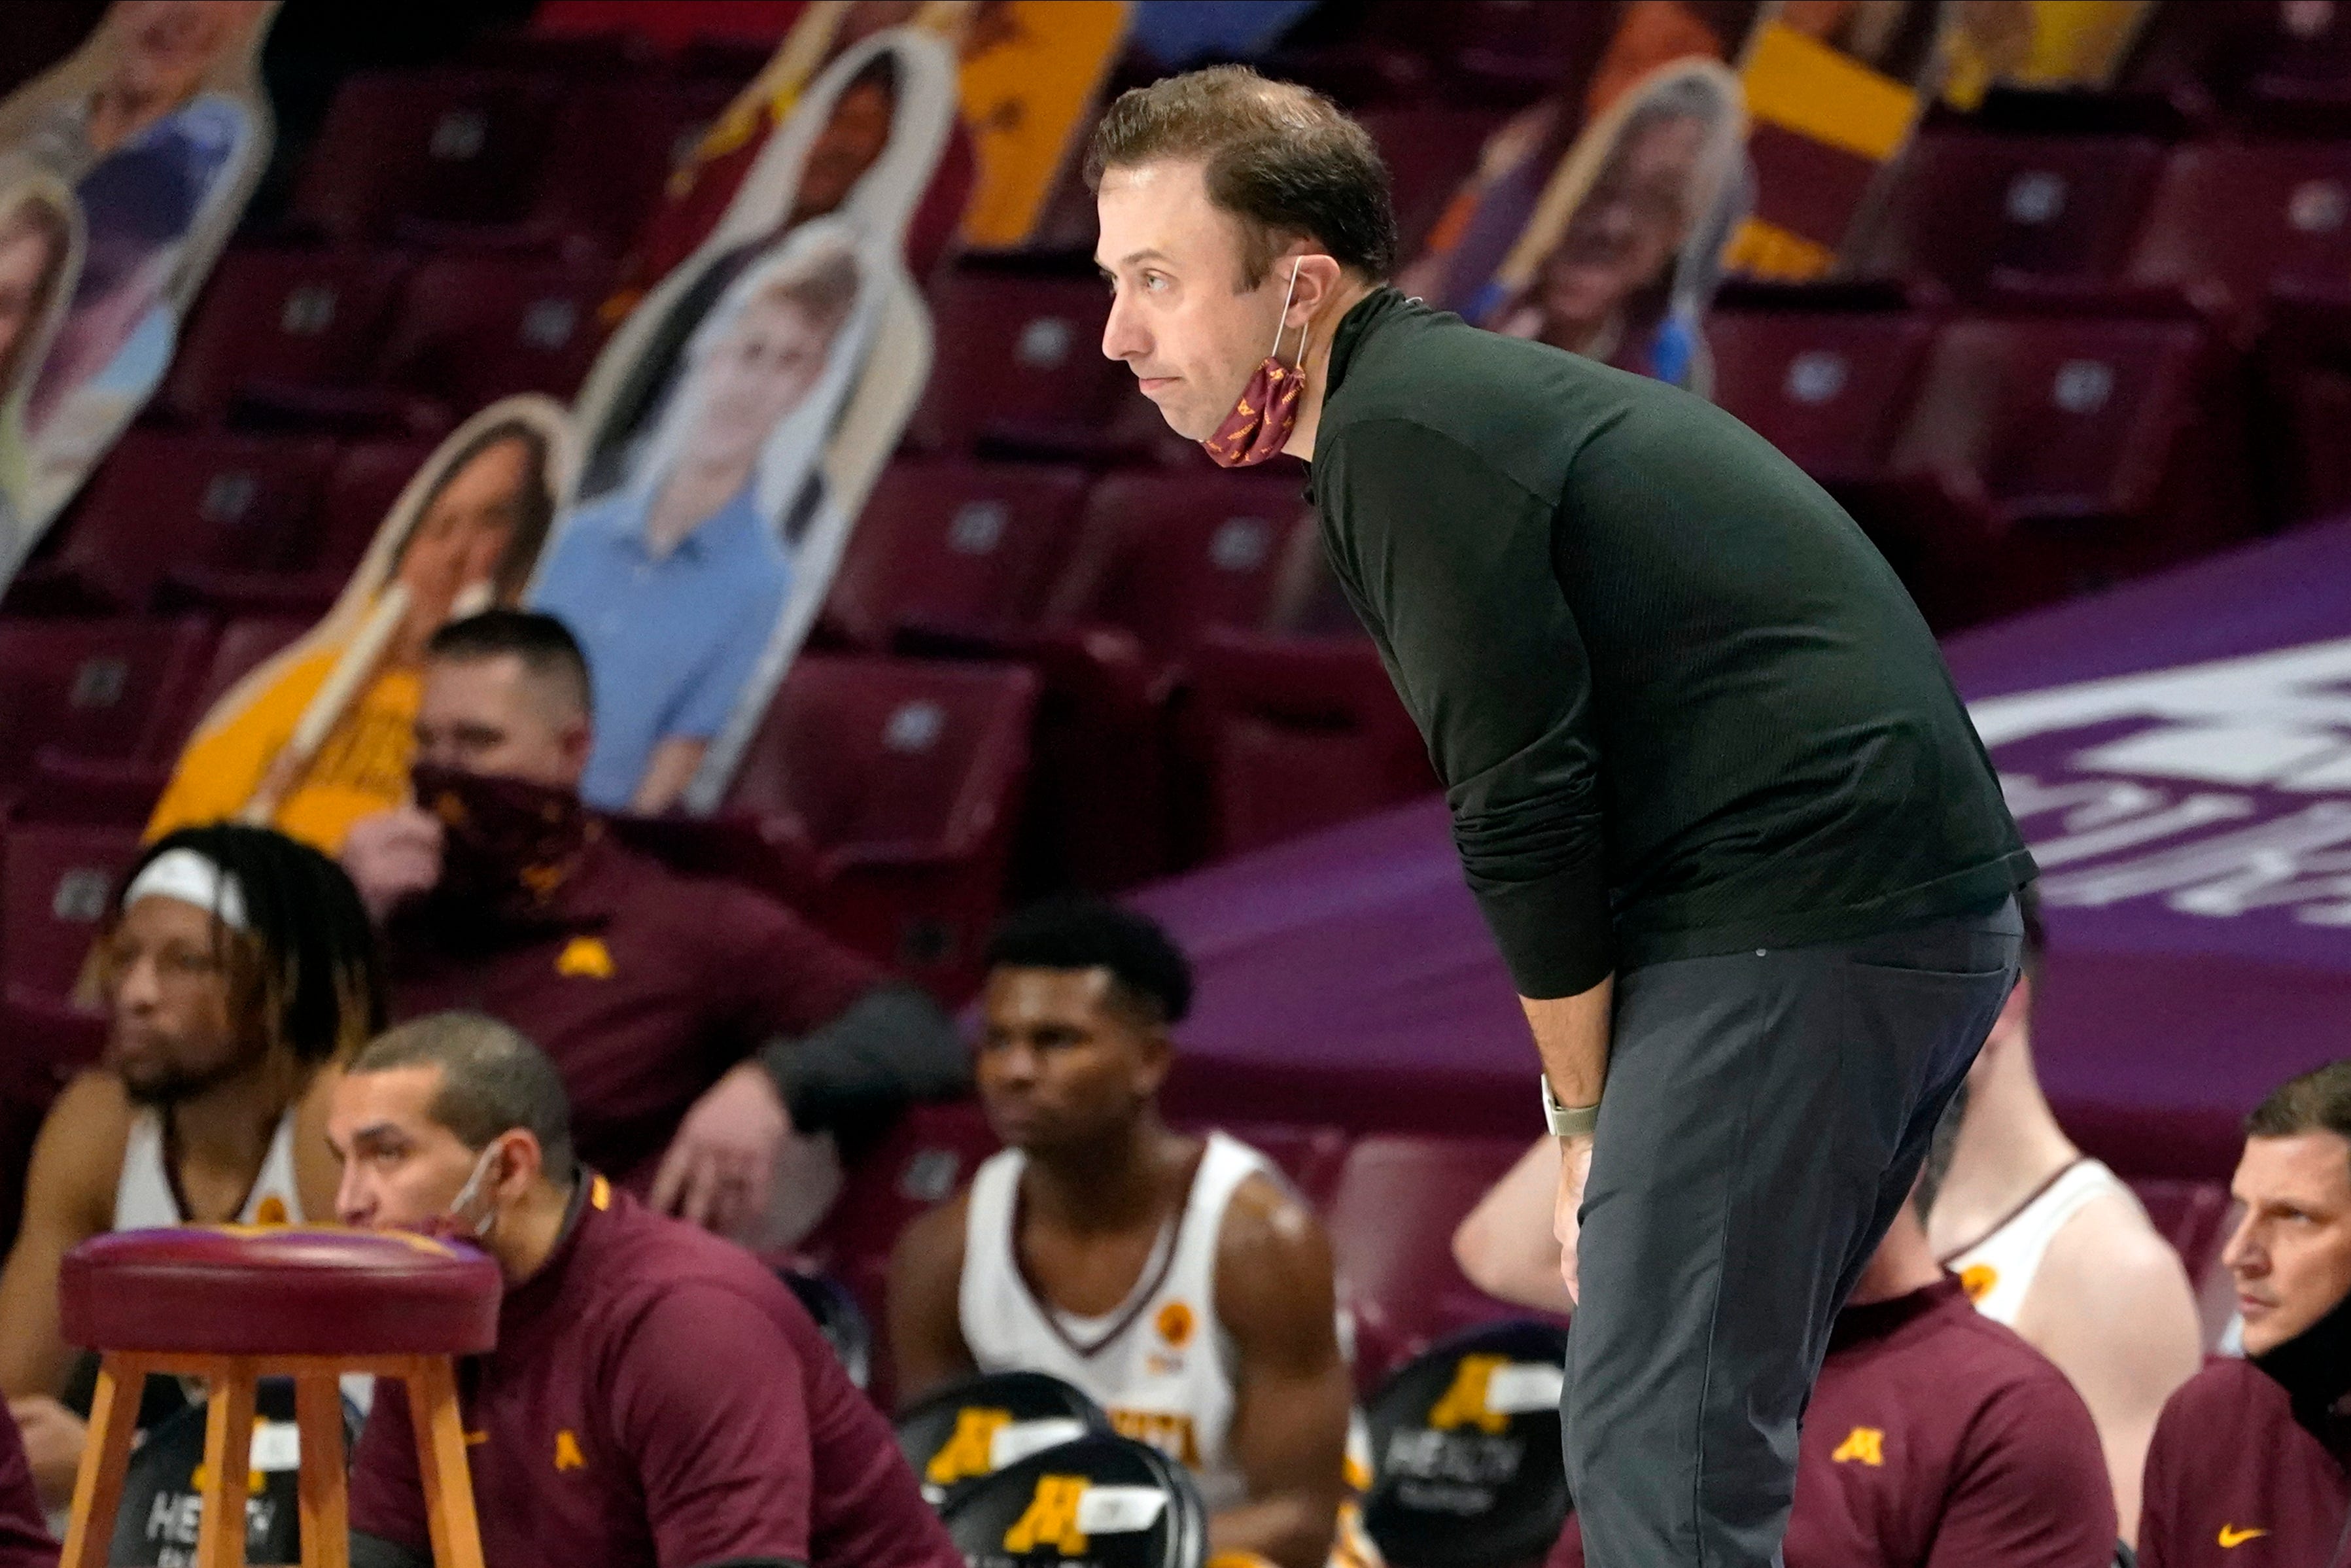 Minnesota head coach Richard Pitino watches his players in the second half.